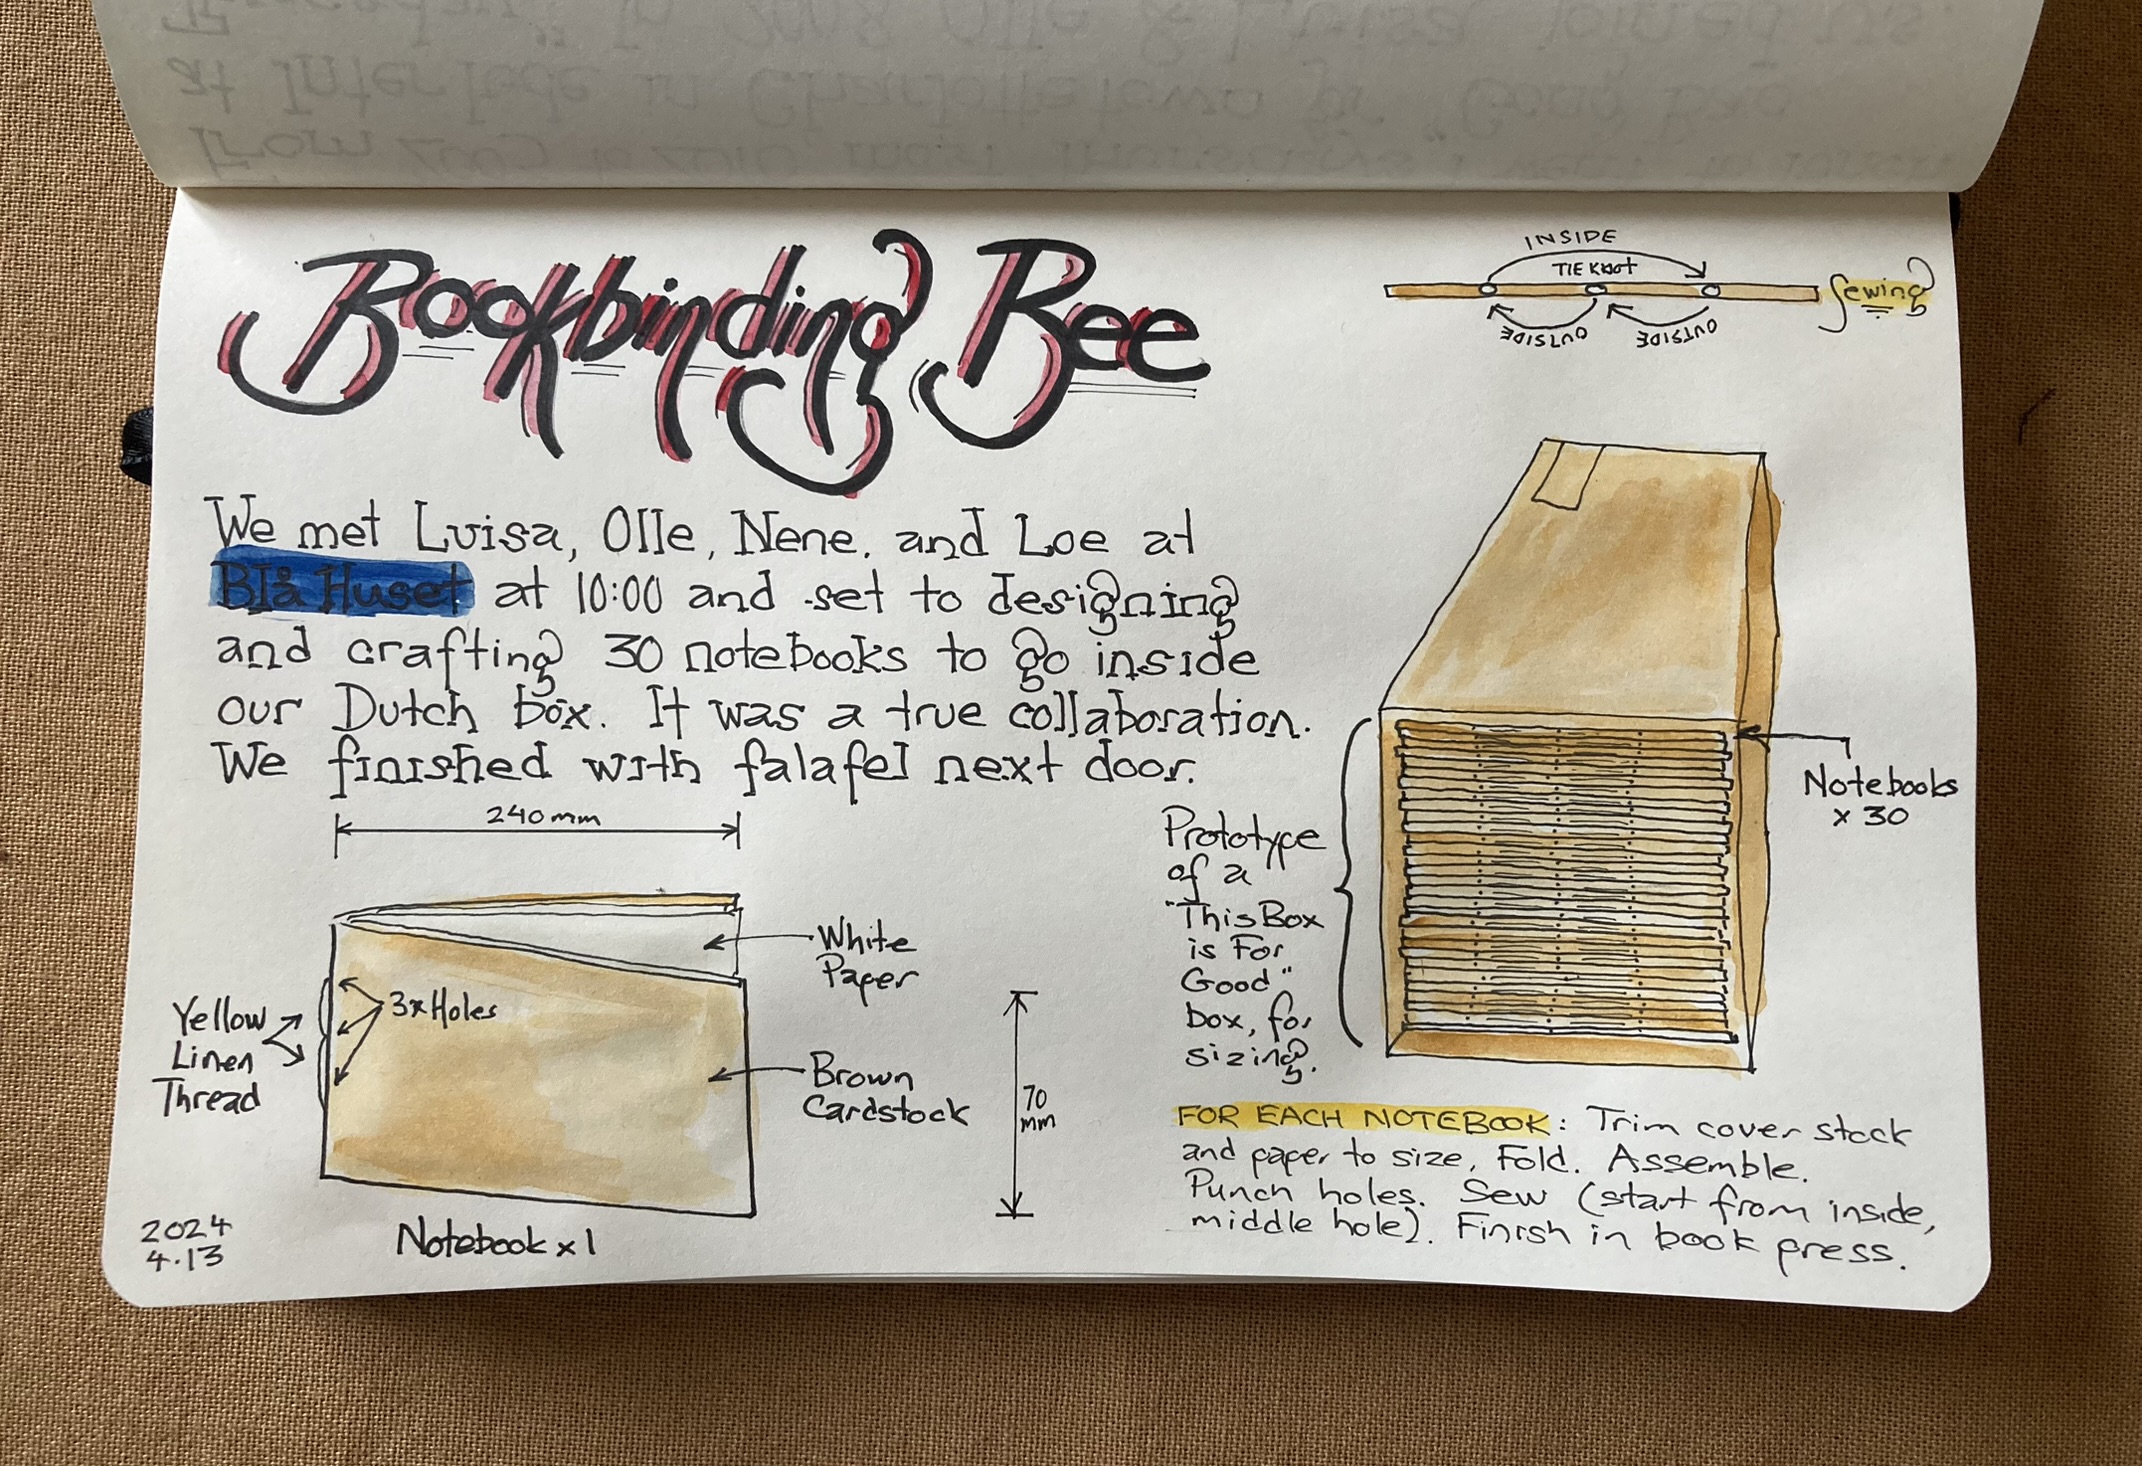 A comic showing the bookbinding bee process.